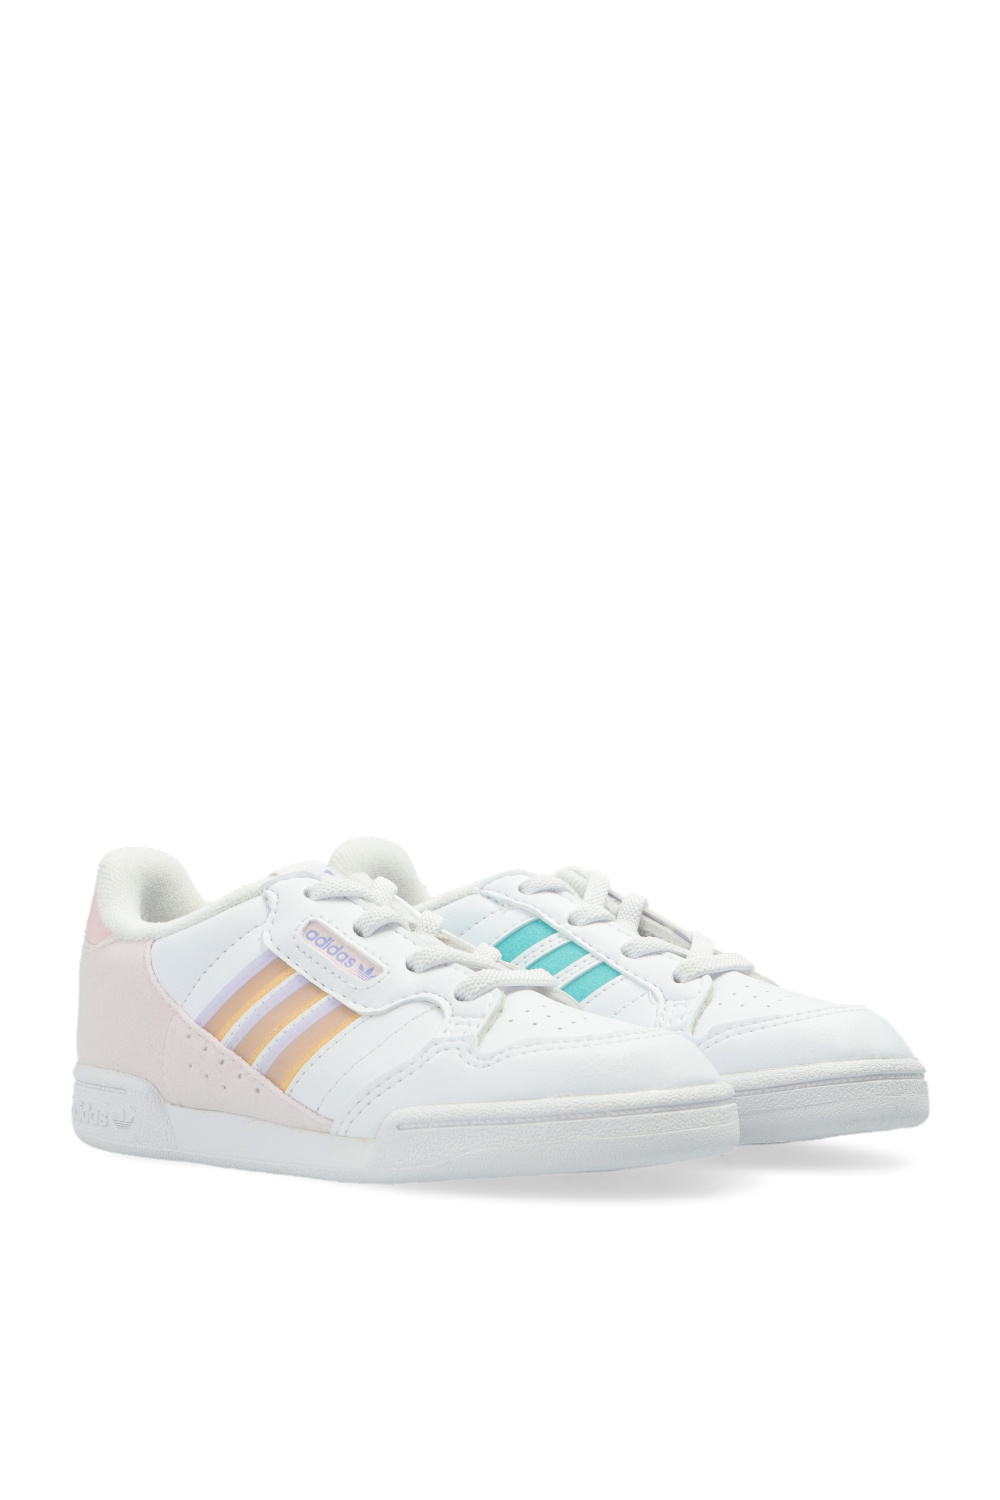 ADIDAS Kids ‘Continental 80 mikiny’ sneakers